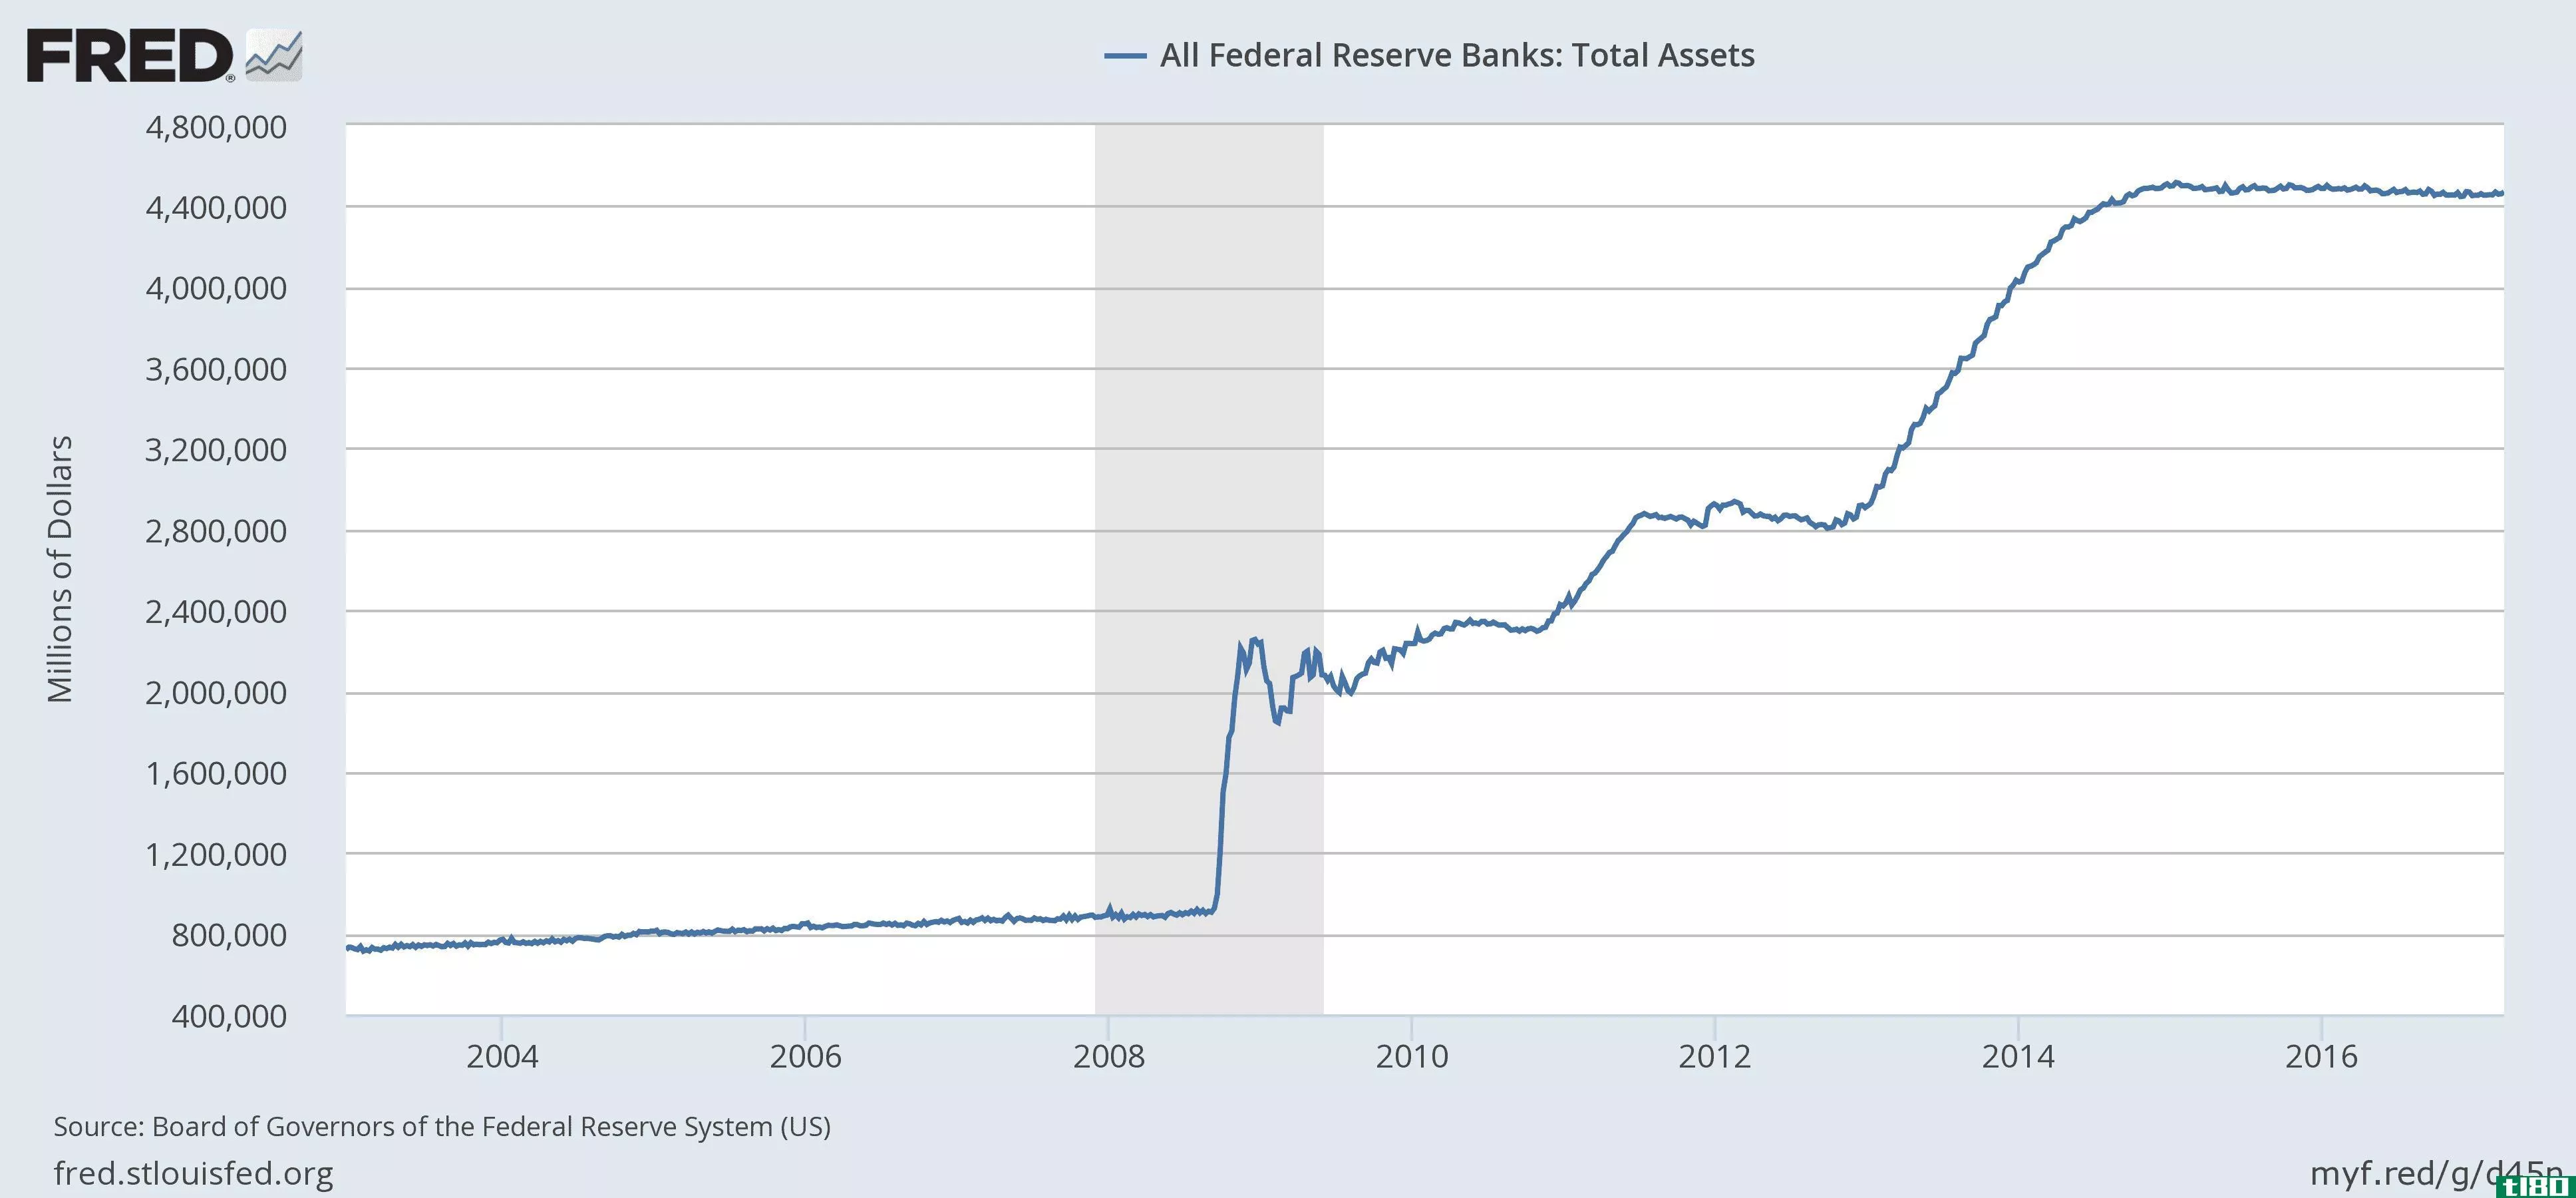 Total Assets of the Federal Reserve Banks